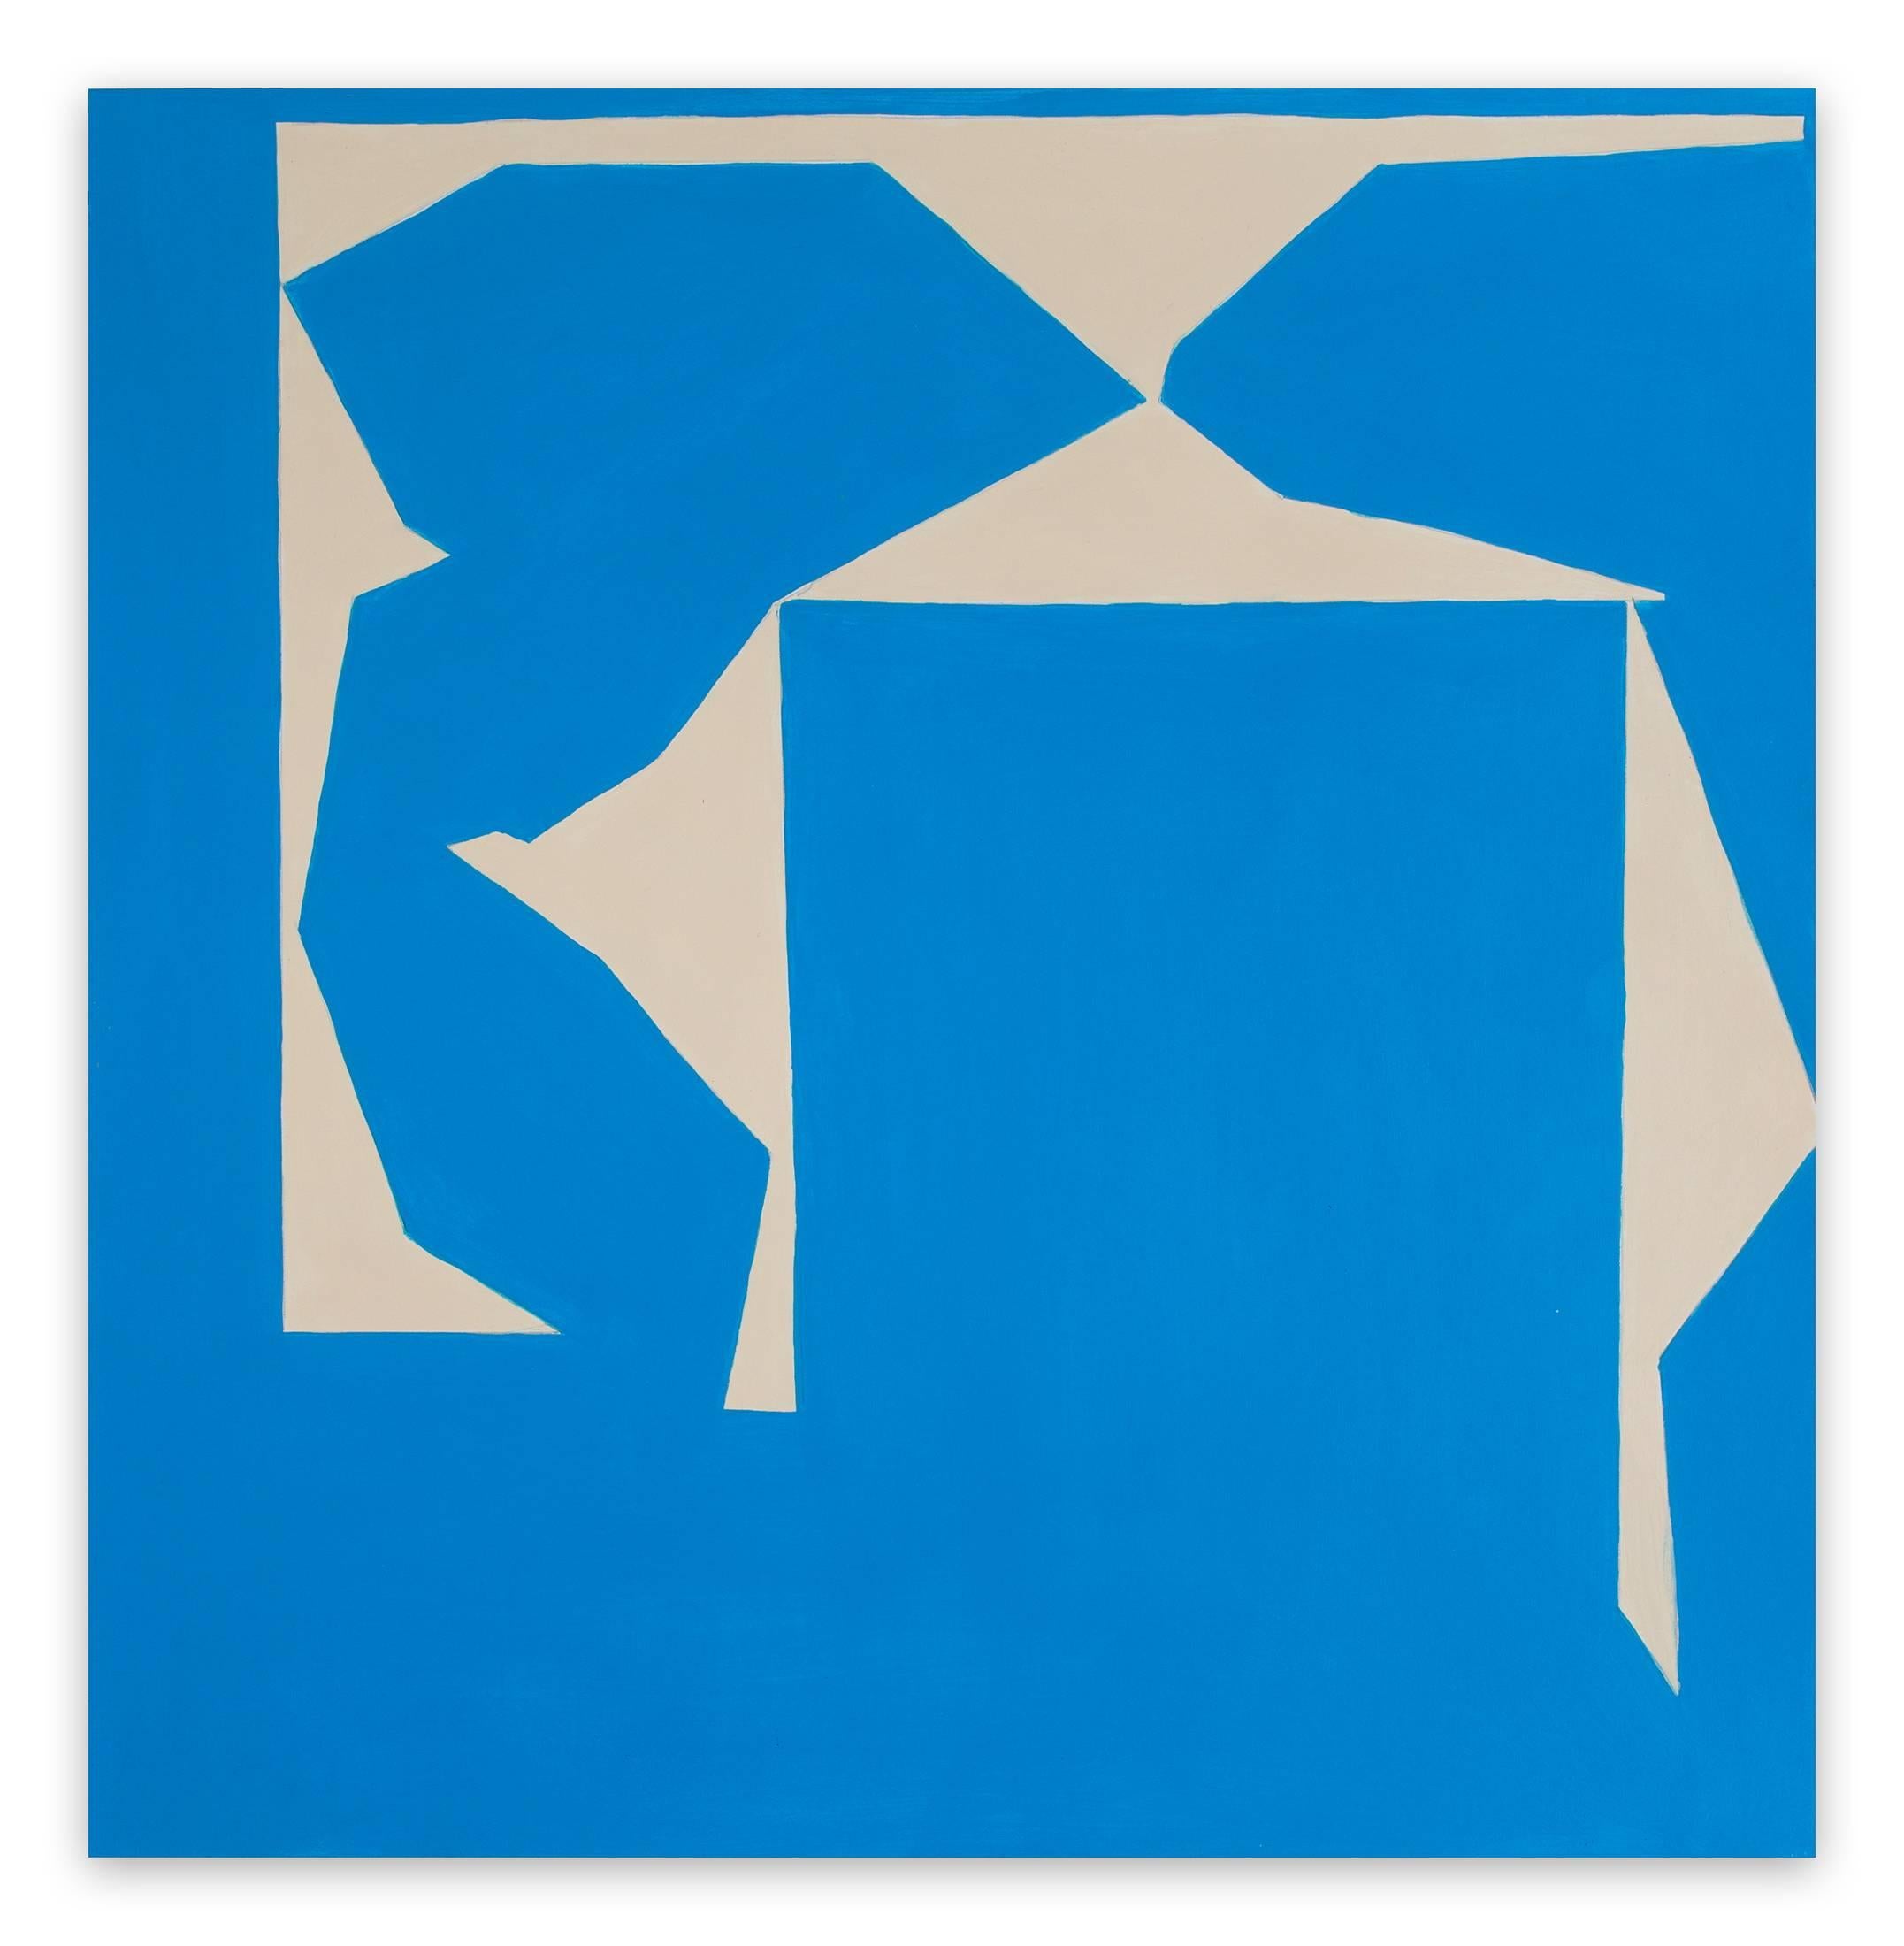 Cut-Up Paper I.14 (Abstract Painting)

Acrylic on paper. Unframed.

Pedersen works with acrylic paint.

When painting a composition, she tends toward a limited color palette, often reducing the composition to minimal, hard-edged shapes on